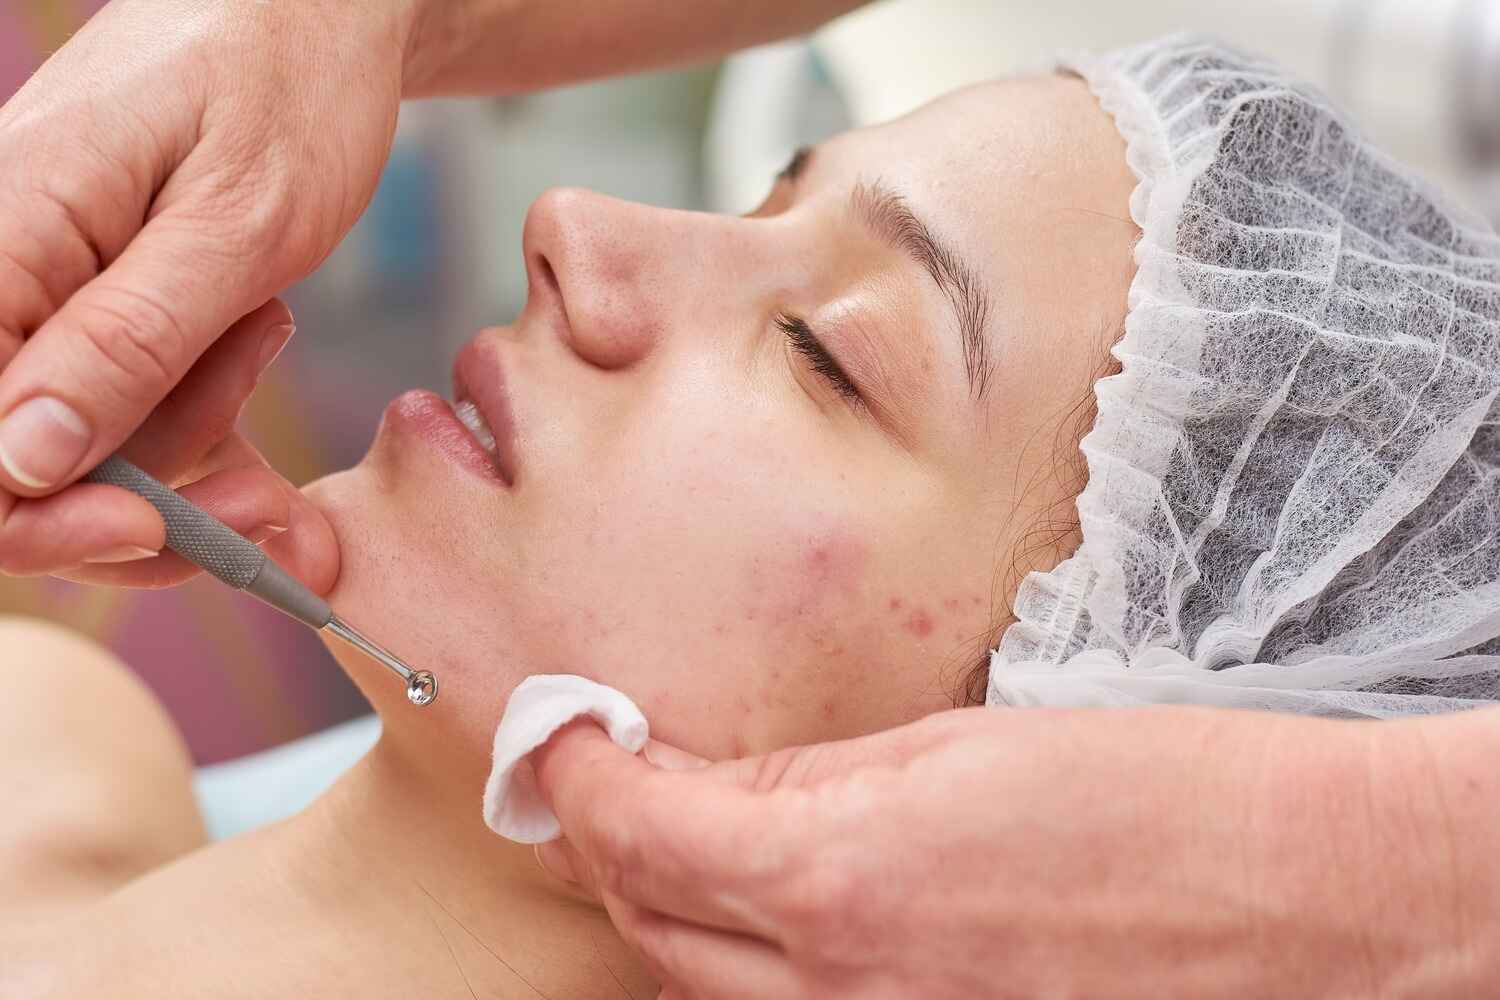 What Are The Types Of Acne?